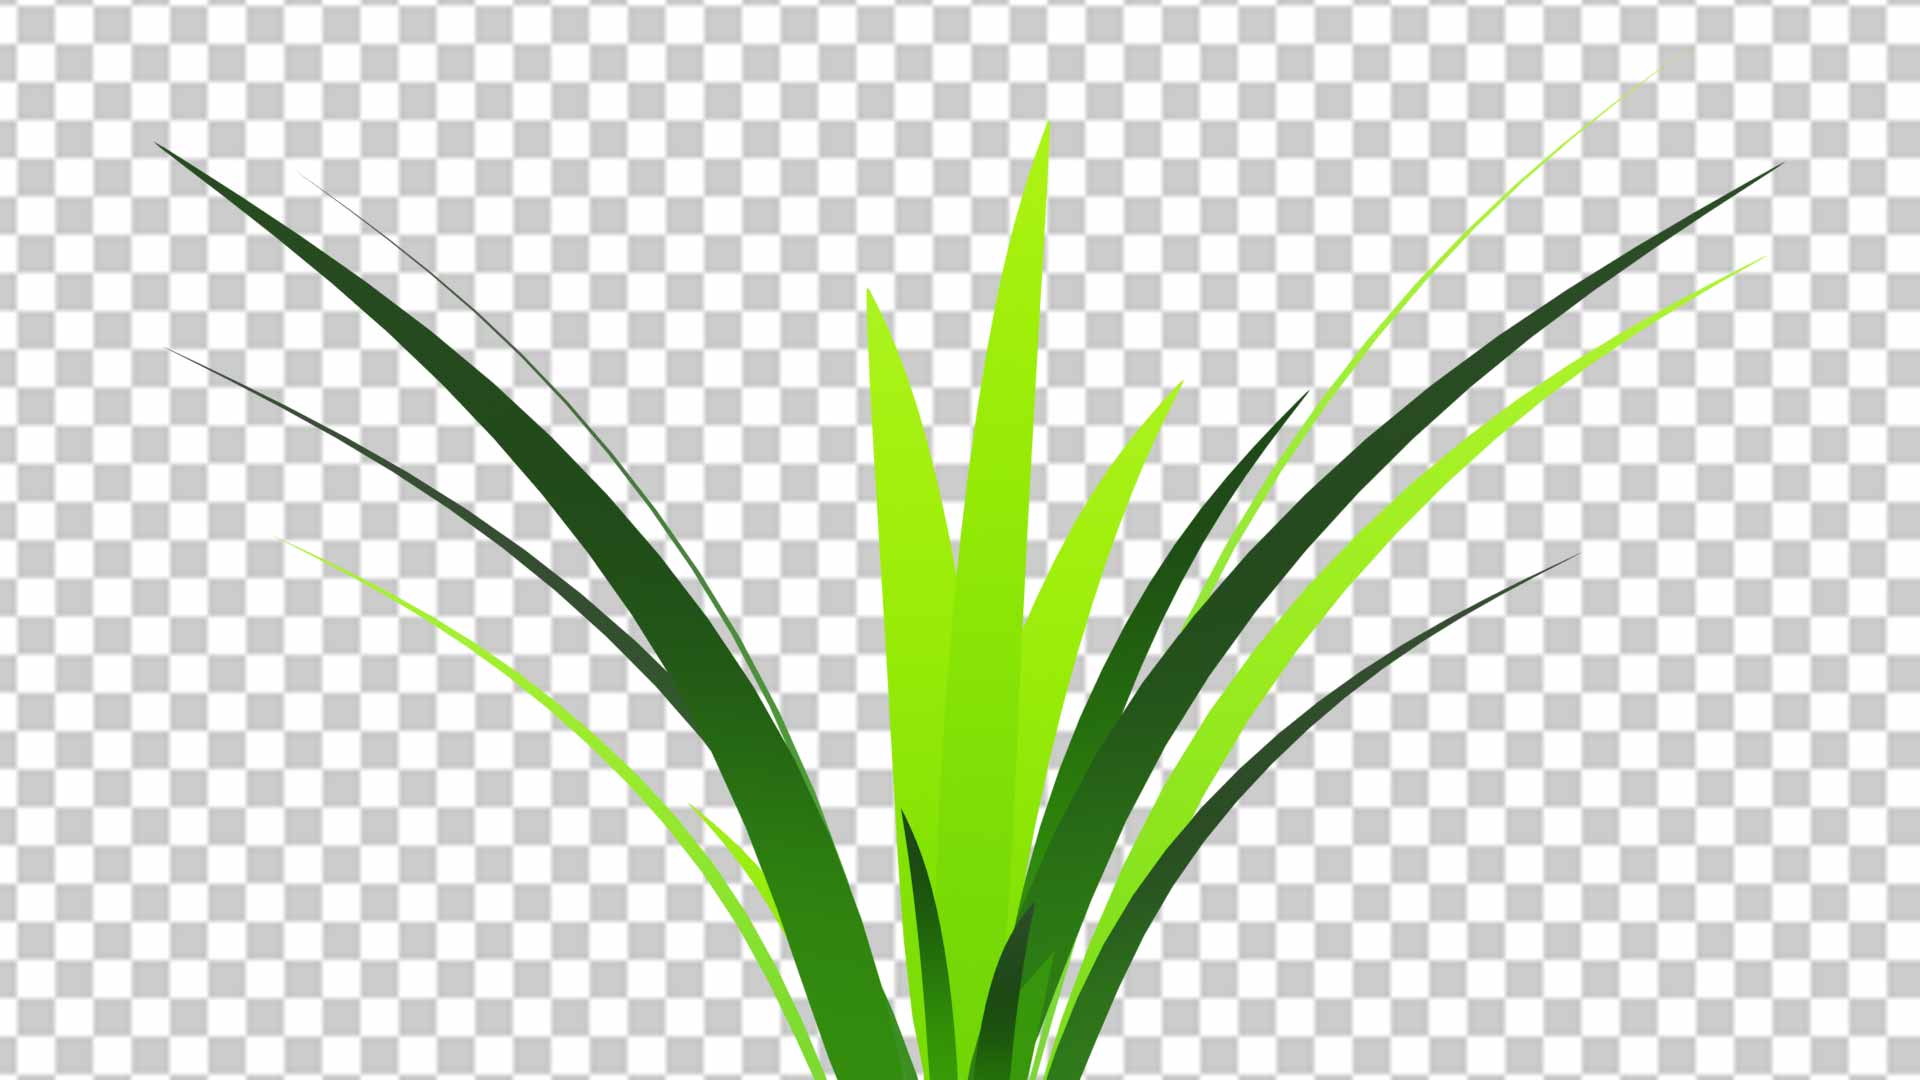 Grass Png Image Download Photo Free Download